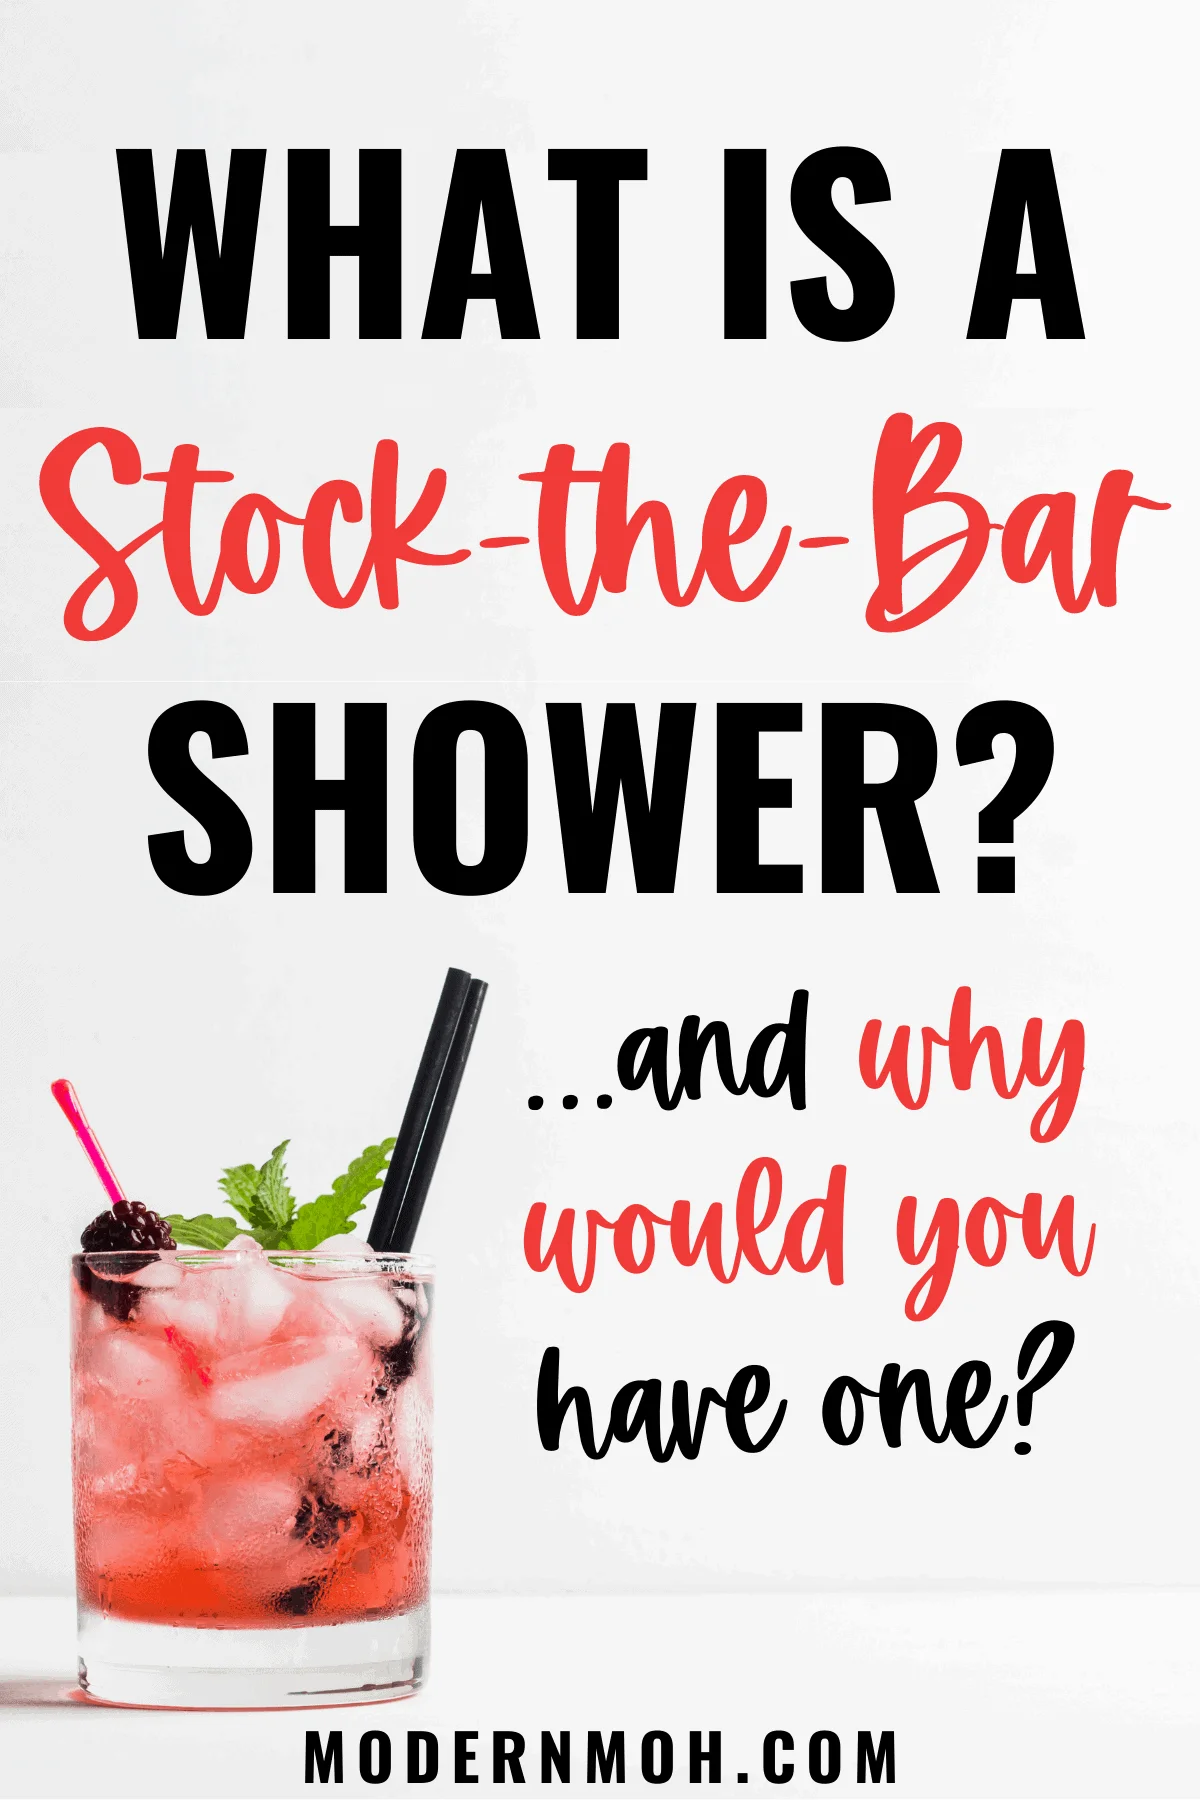 How to Host a Stock-the-Bar Shower